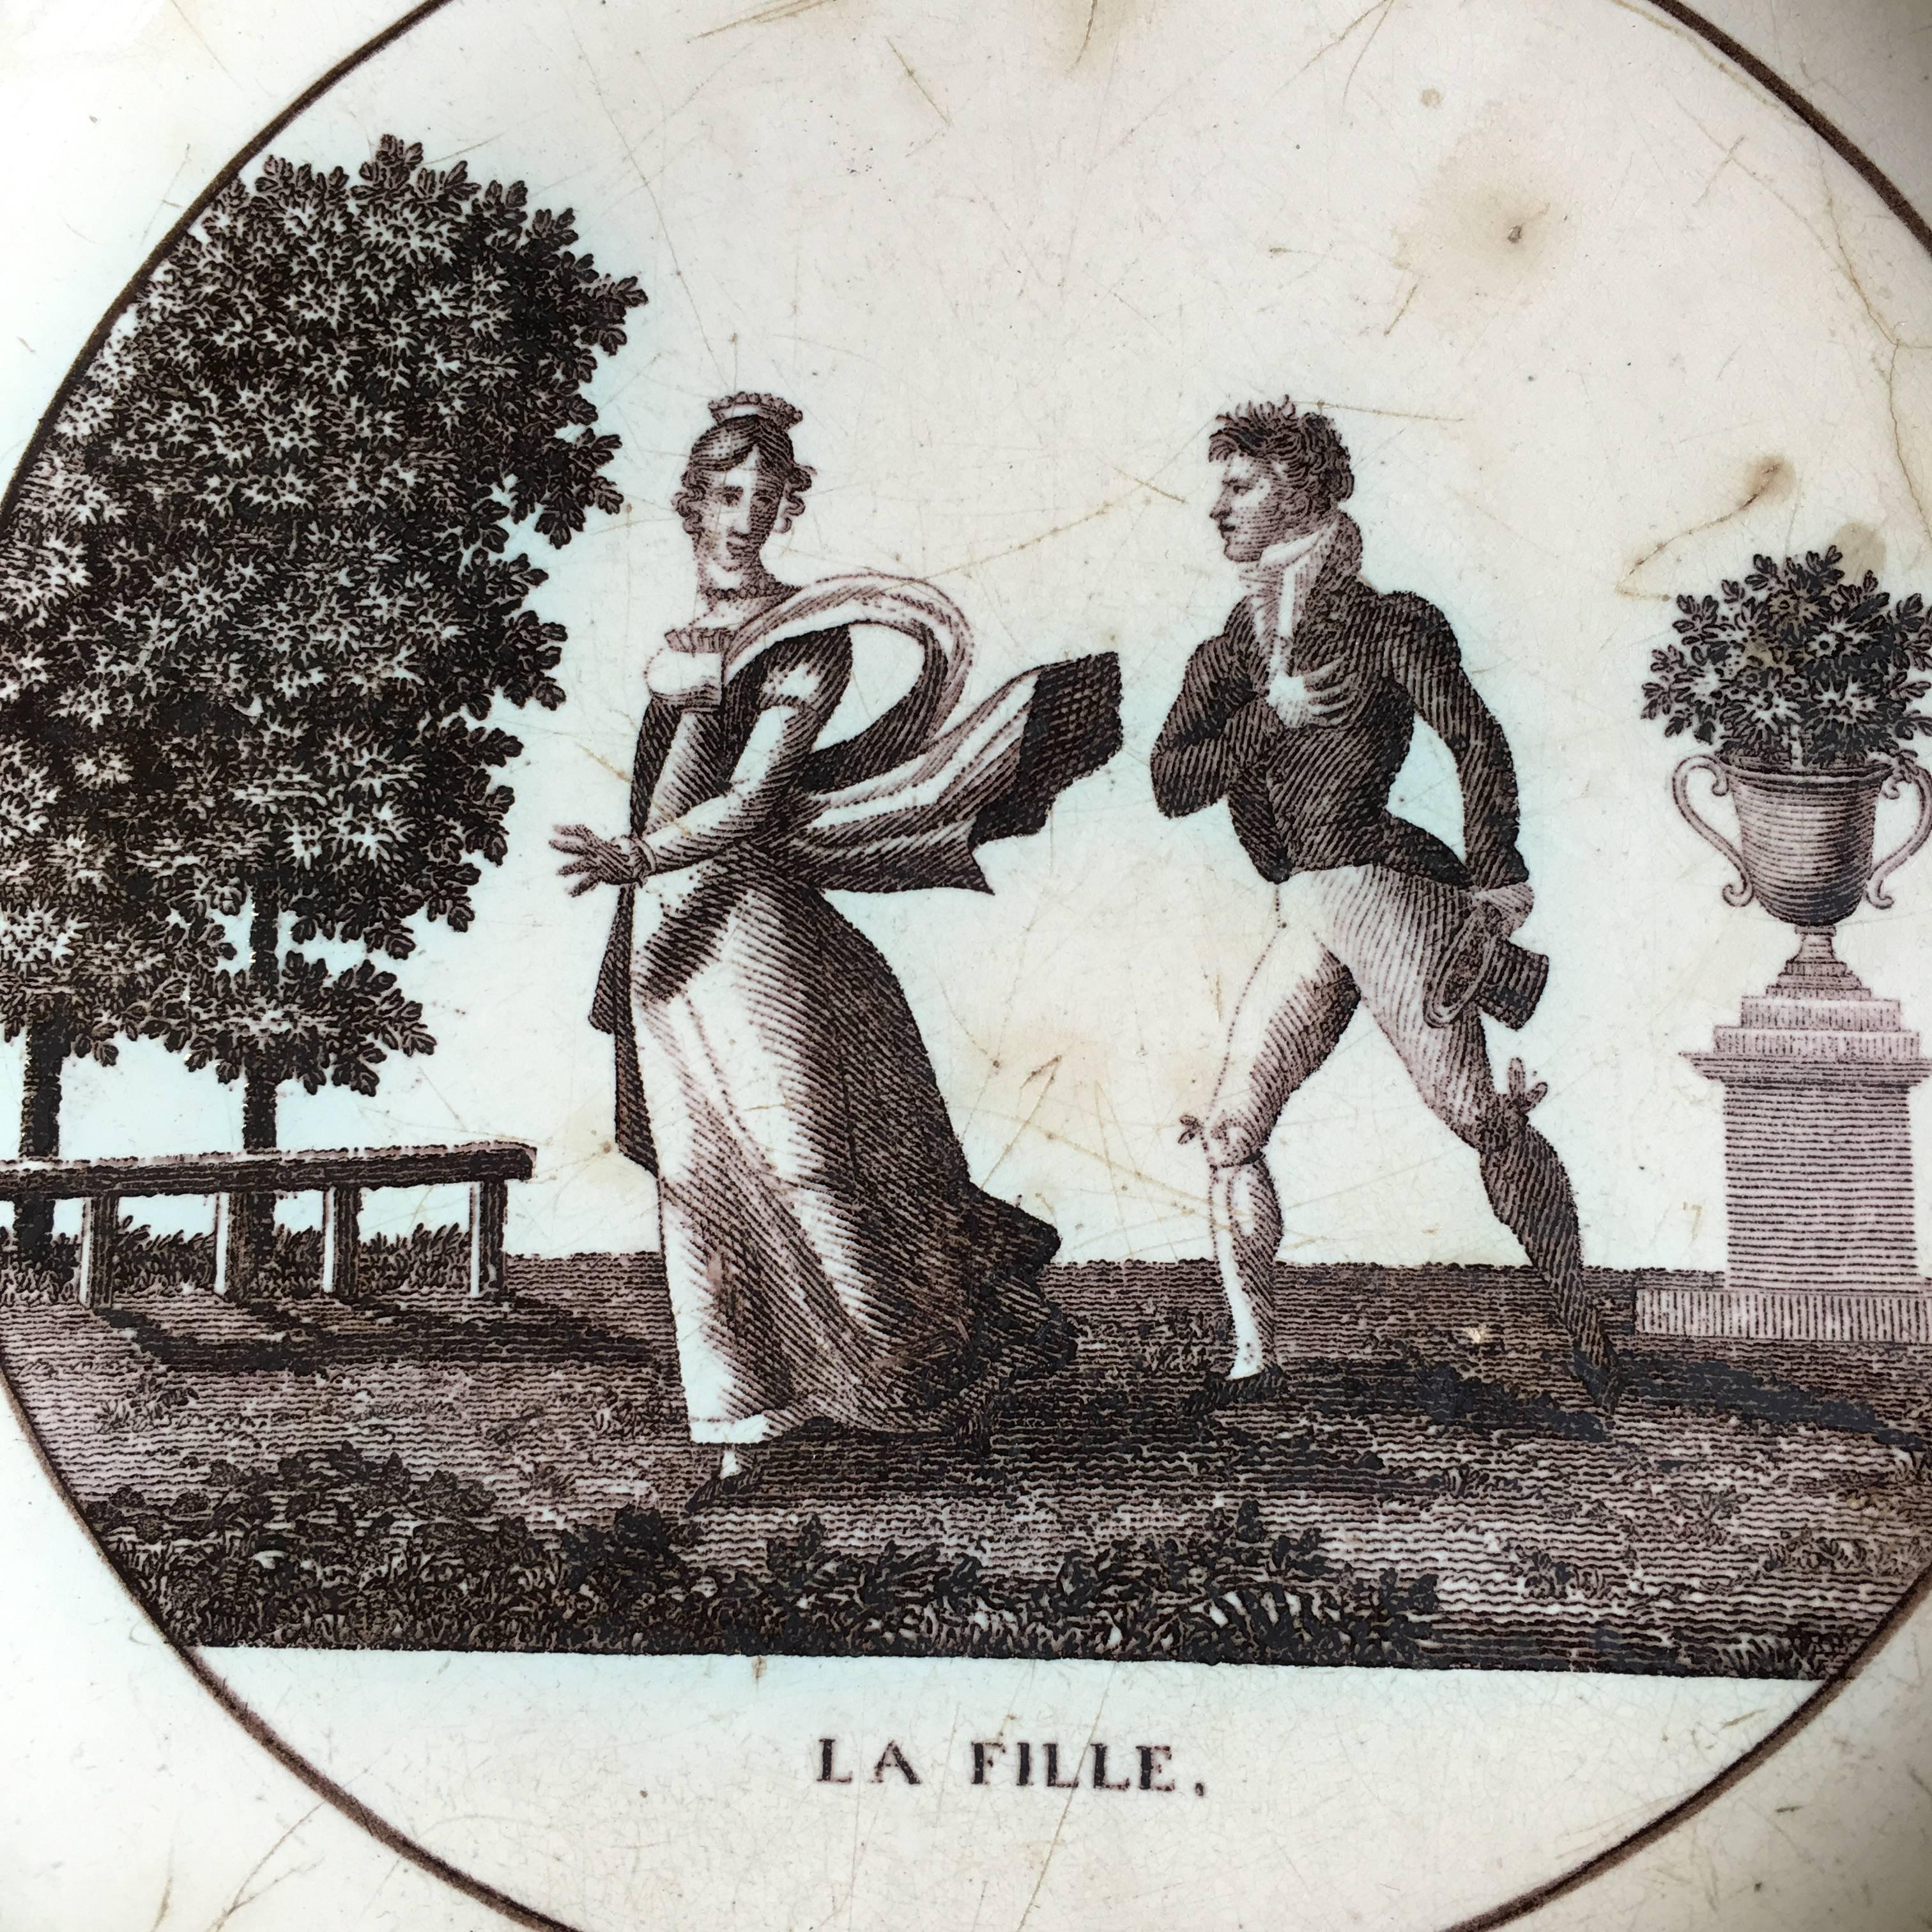 An early 19th century French Empire period pictorial plate from Creil, circa 1810, depicting a wonderfully stylized scene of a man courting a woman. Great graphic appeal. Signed 